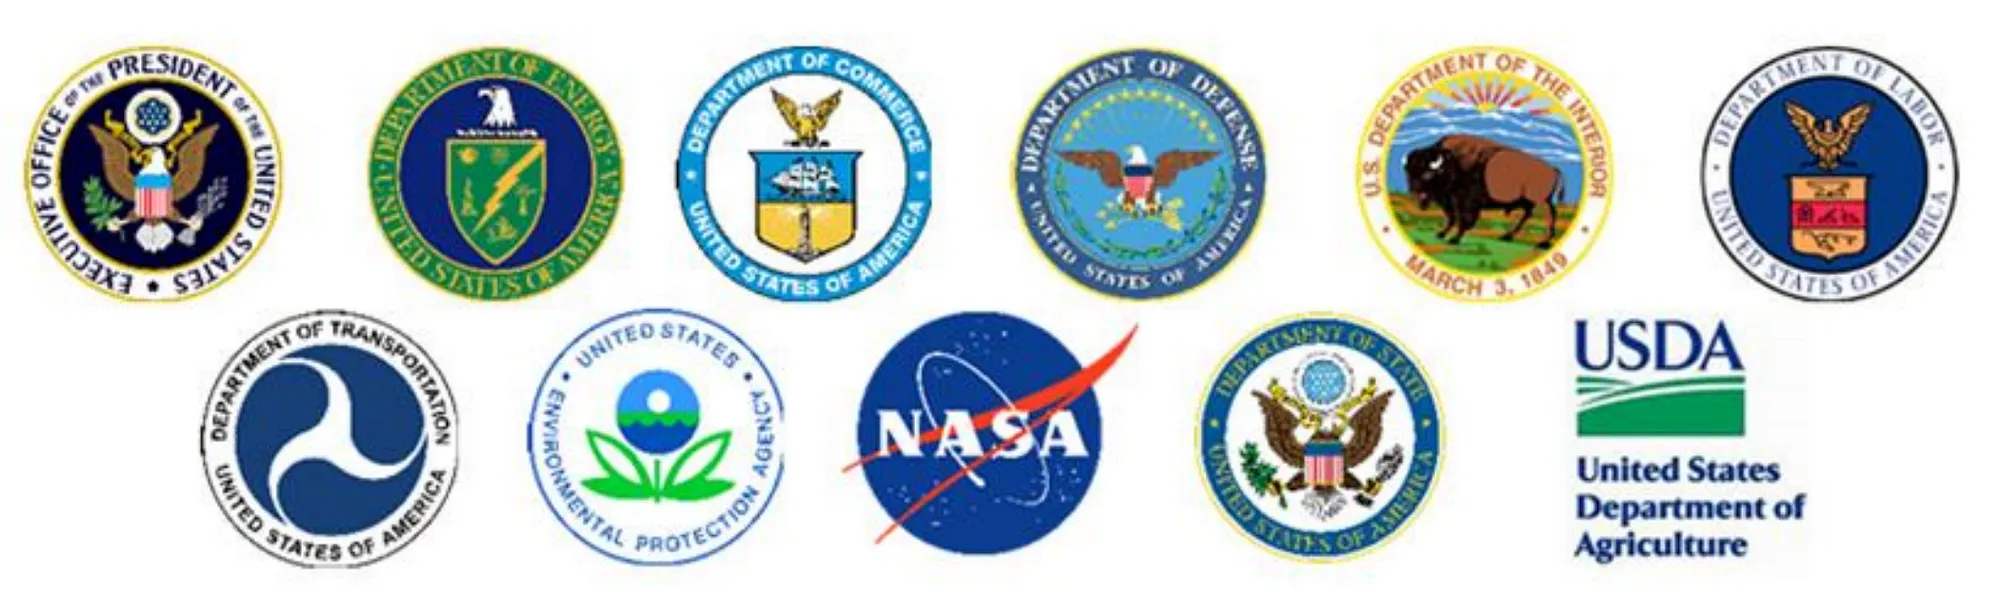 Logos of US agencies and departments involved in the US hydrogen strategy